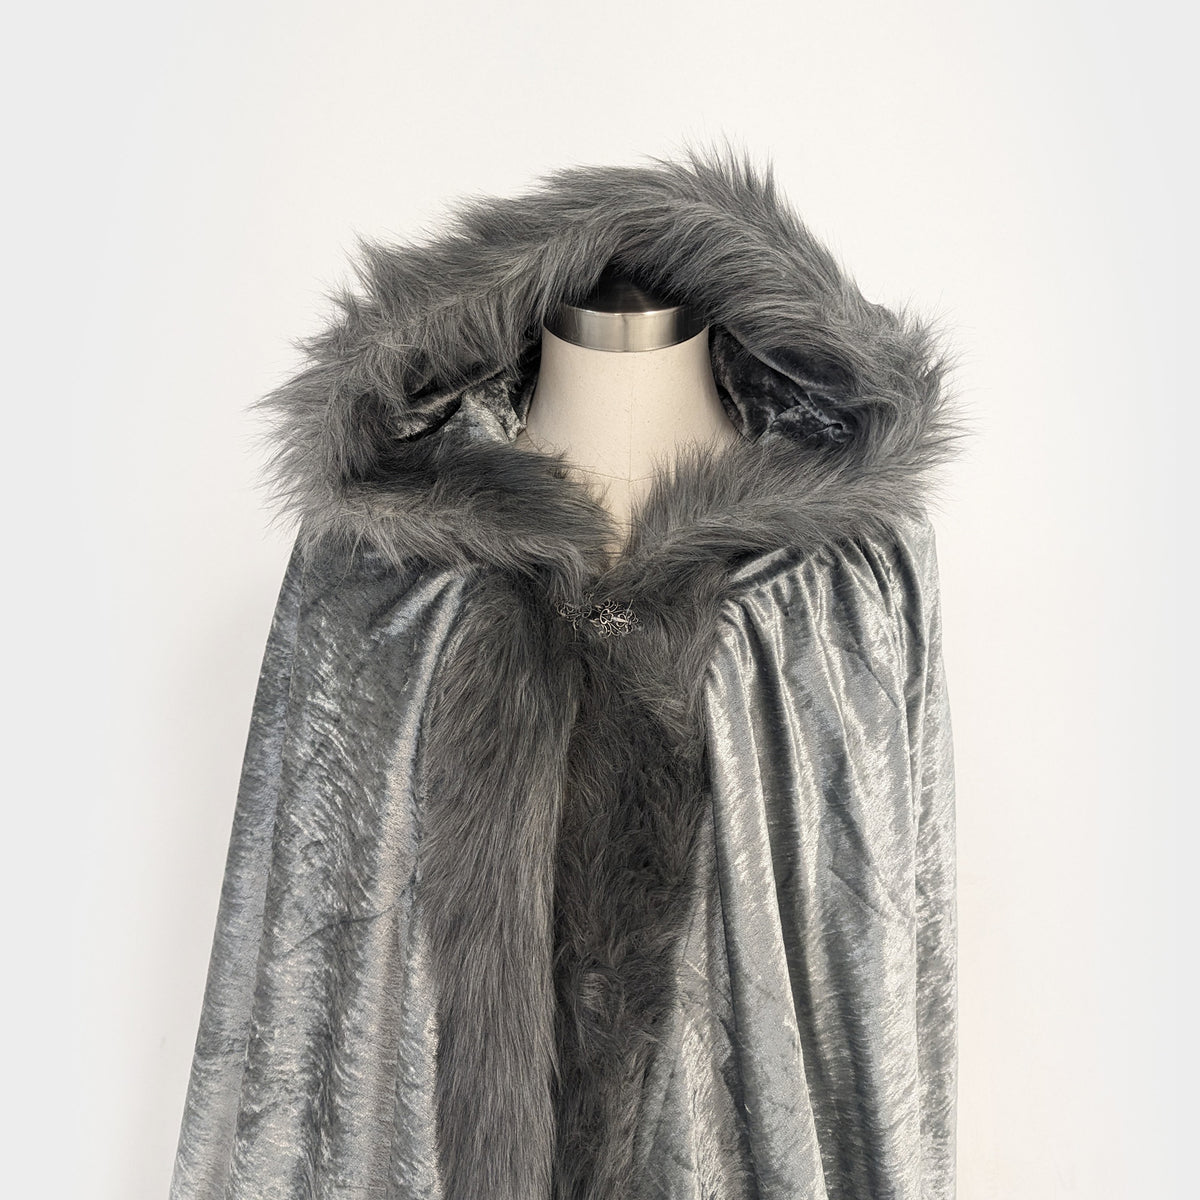 White Cloak with Large Hood, White Faux Fur Trim, and Metal Clasp – Everfan